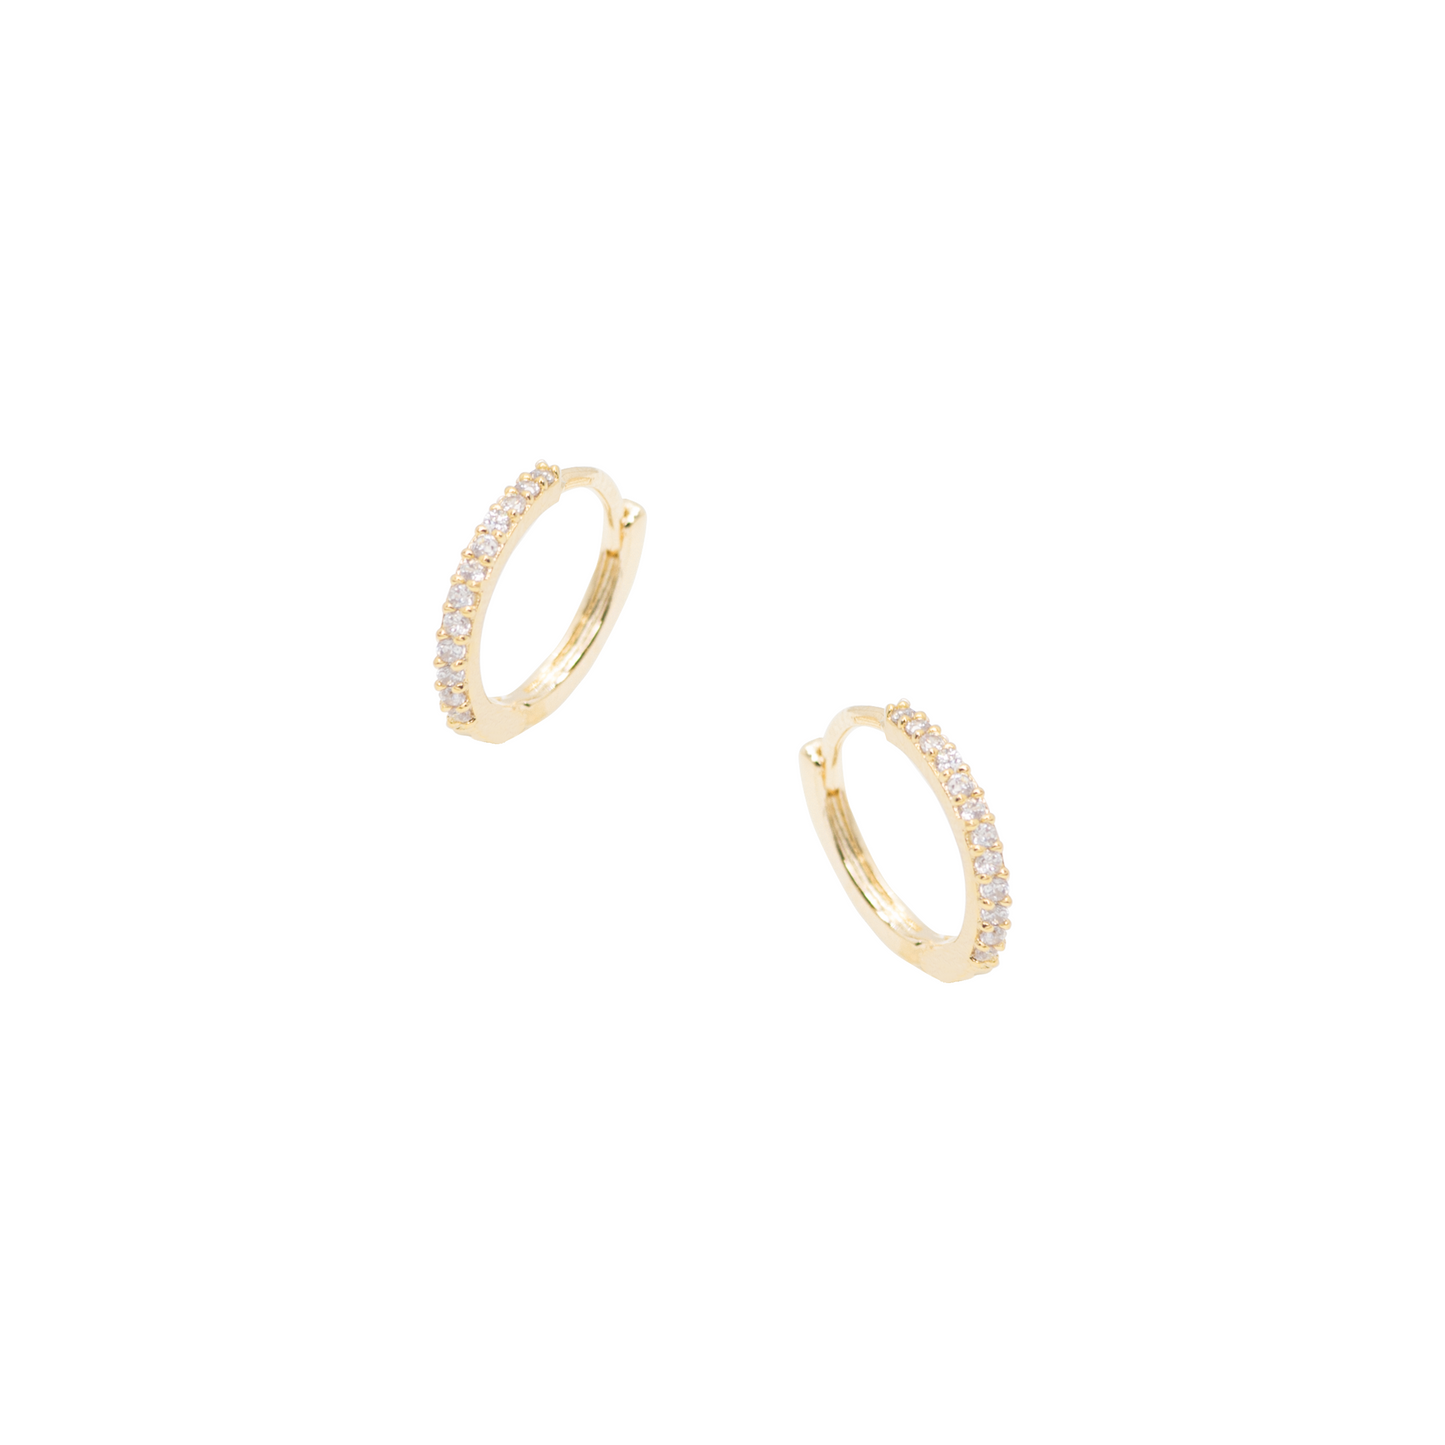 Pair of Thin Small Gold CZ Hoops